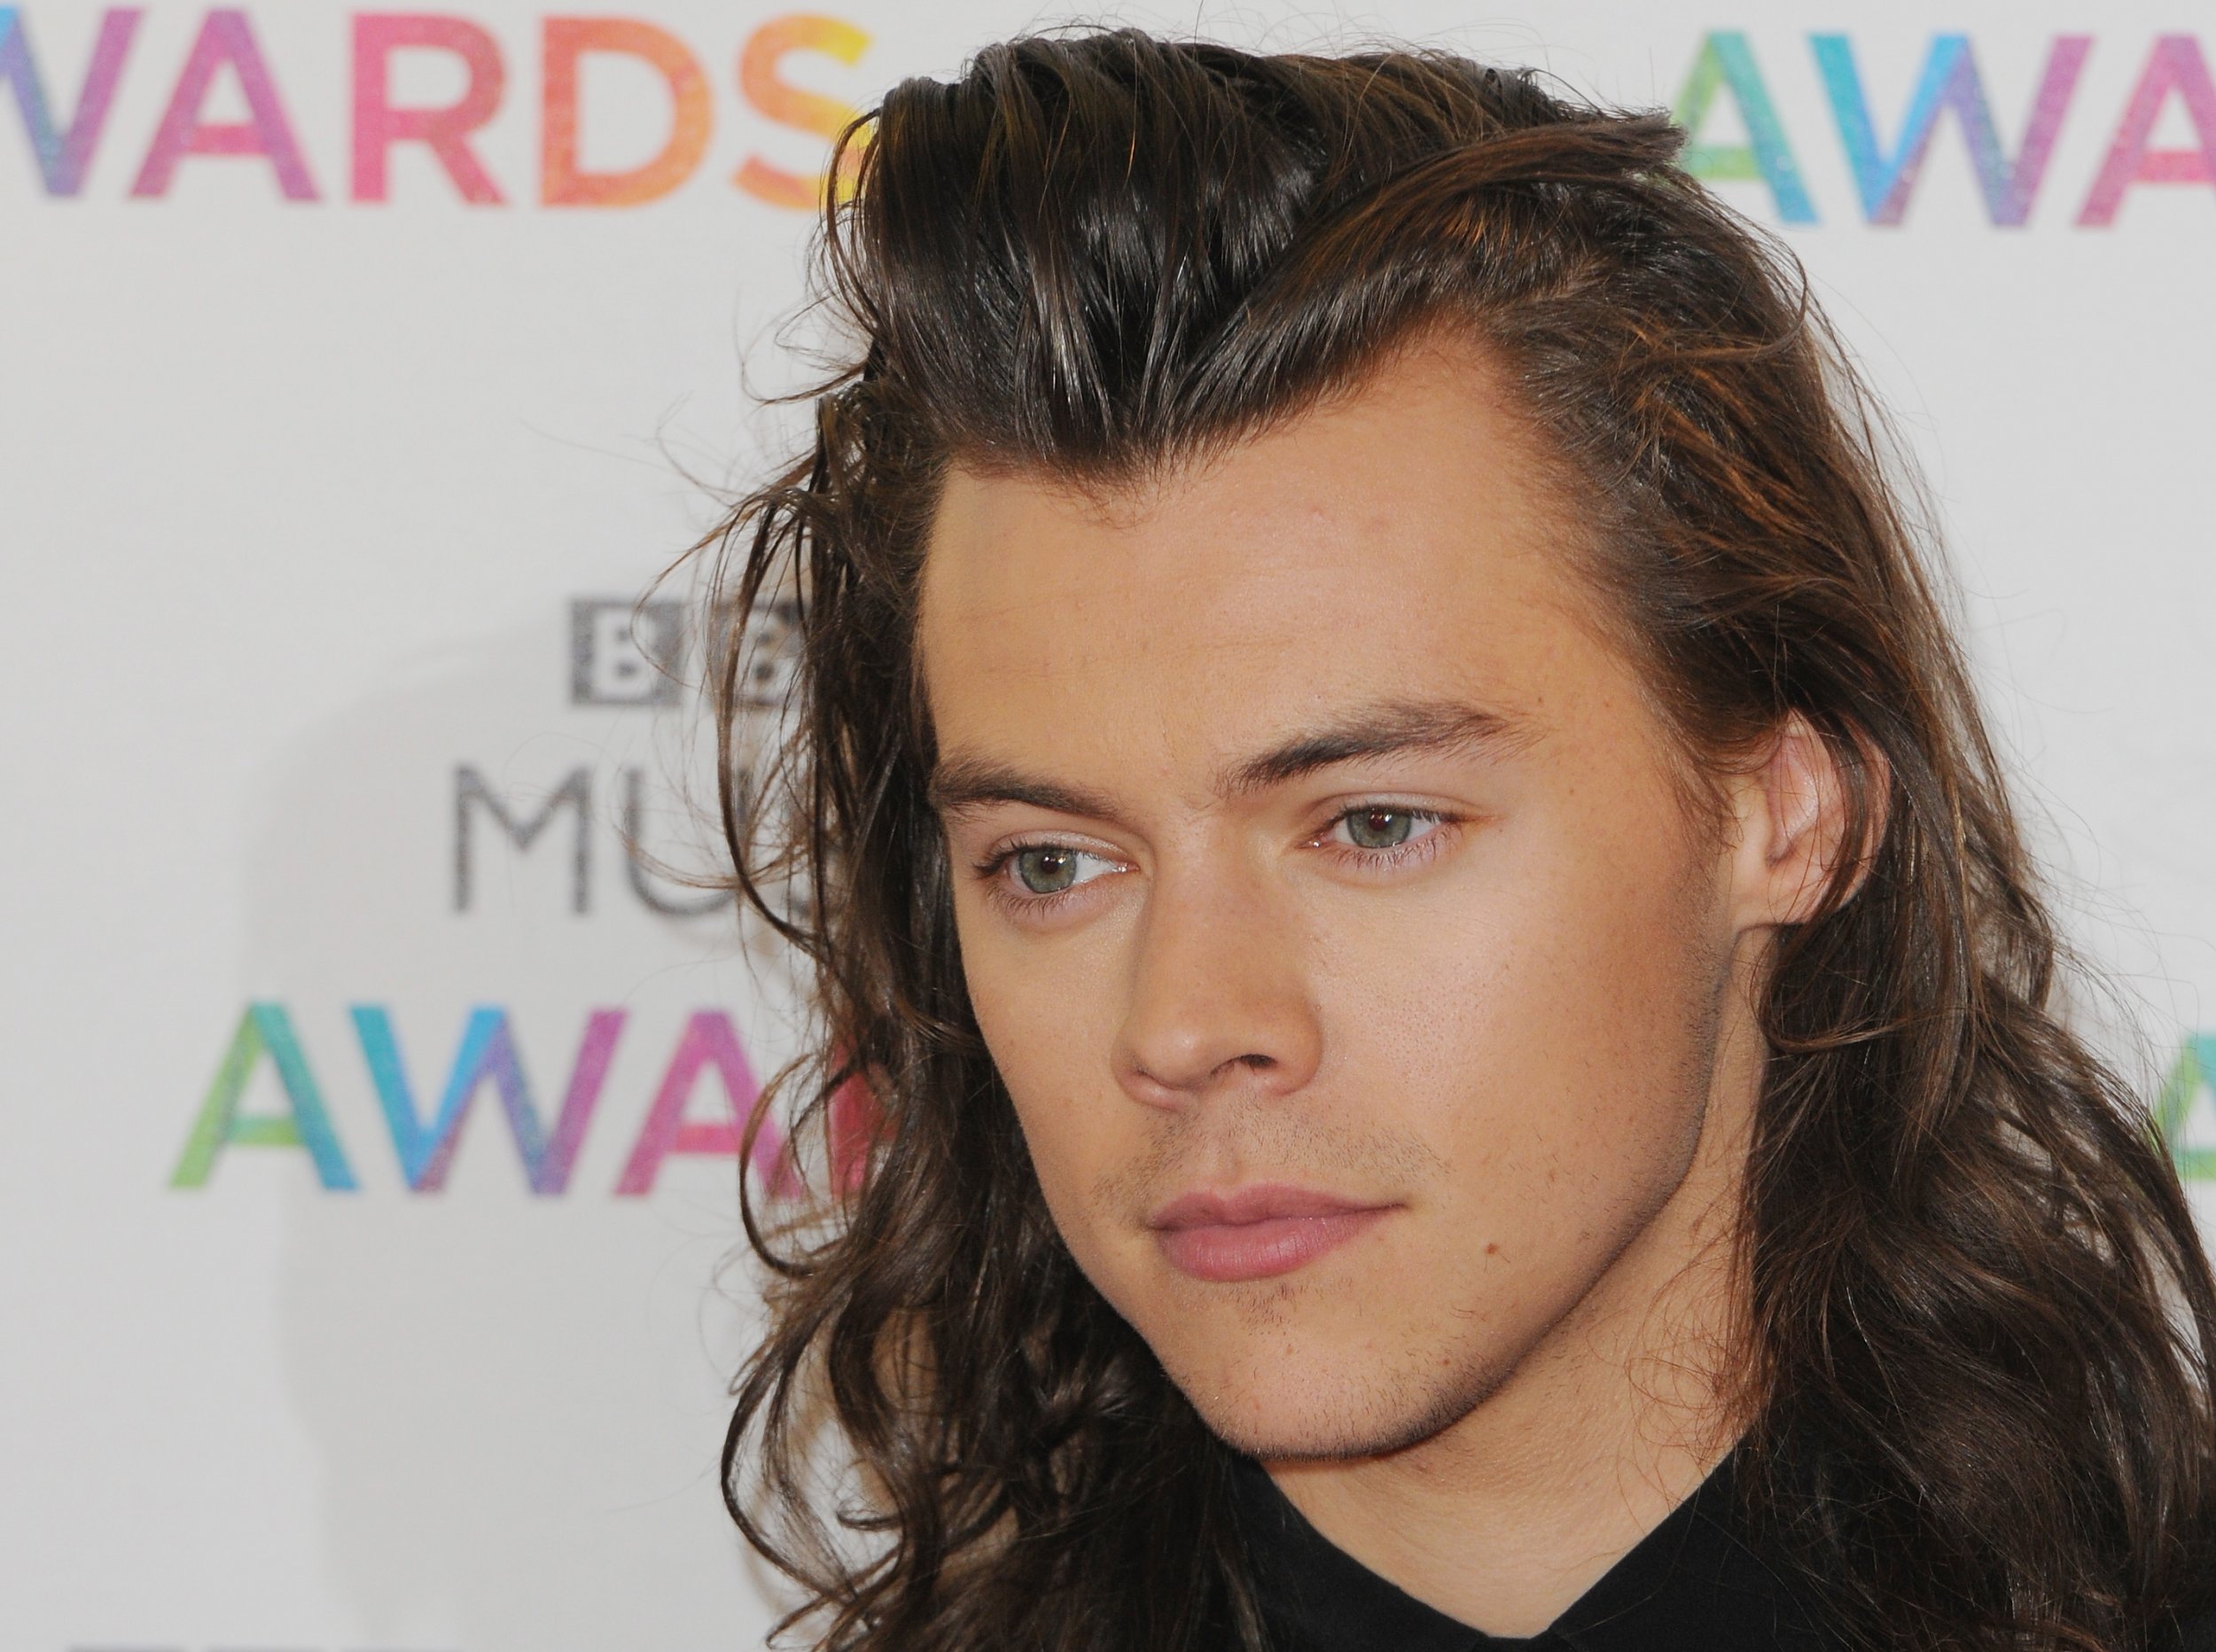 English Face Harry Styles Singer 2500x1864